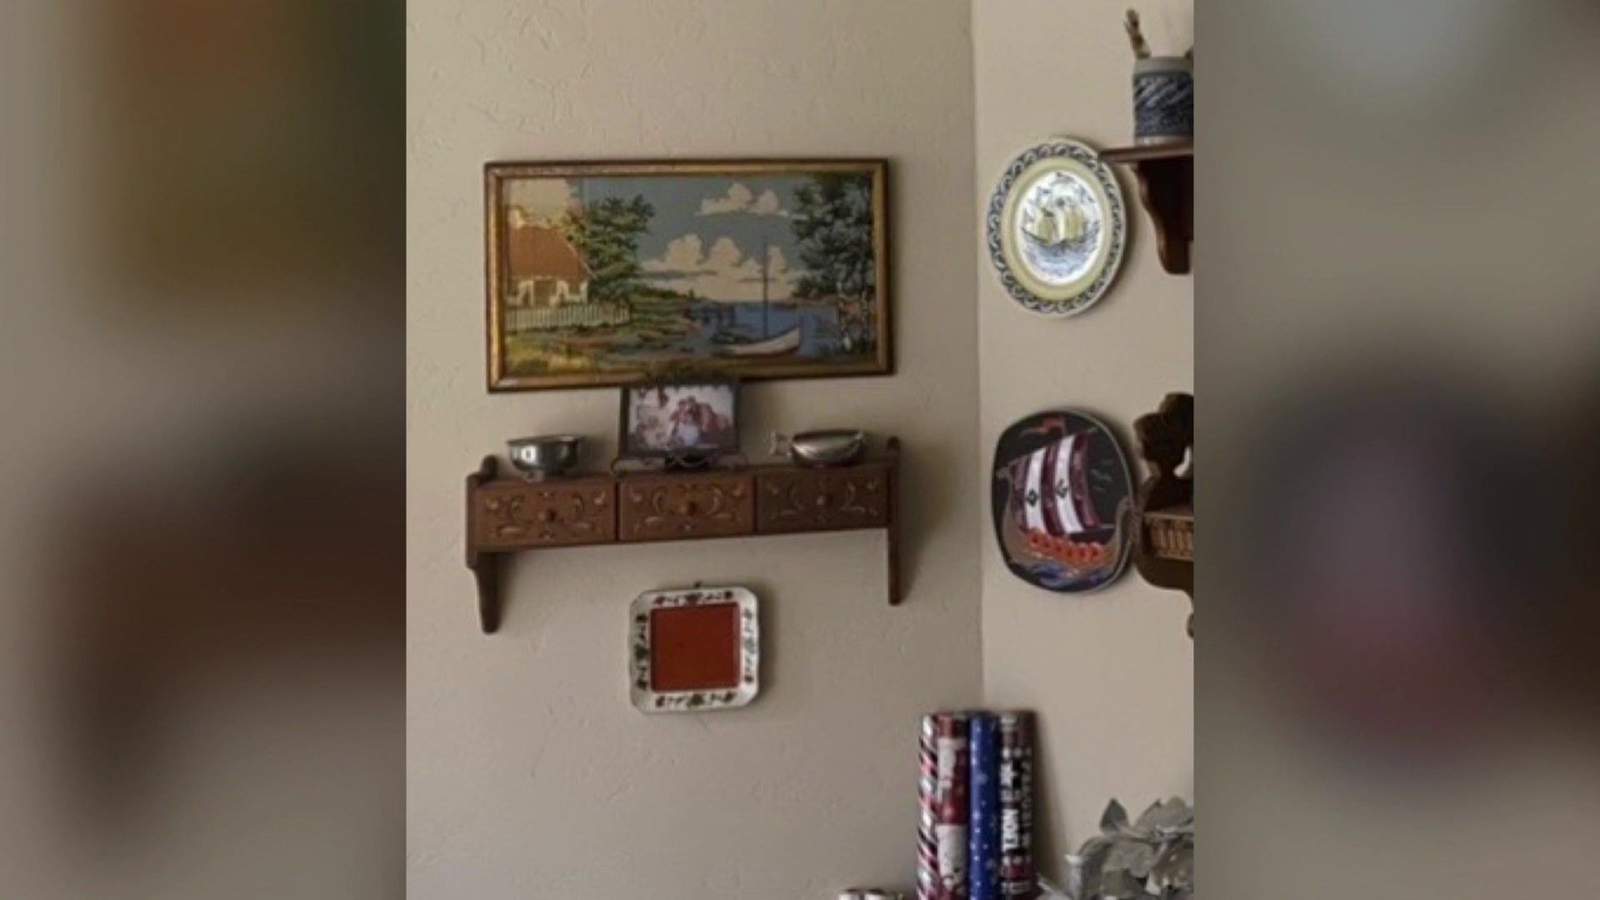 Woman who recently moved to Houston says moving company won’t give back family heirlooms